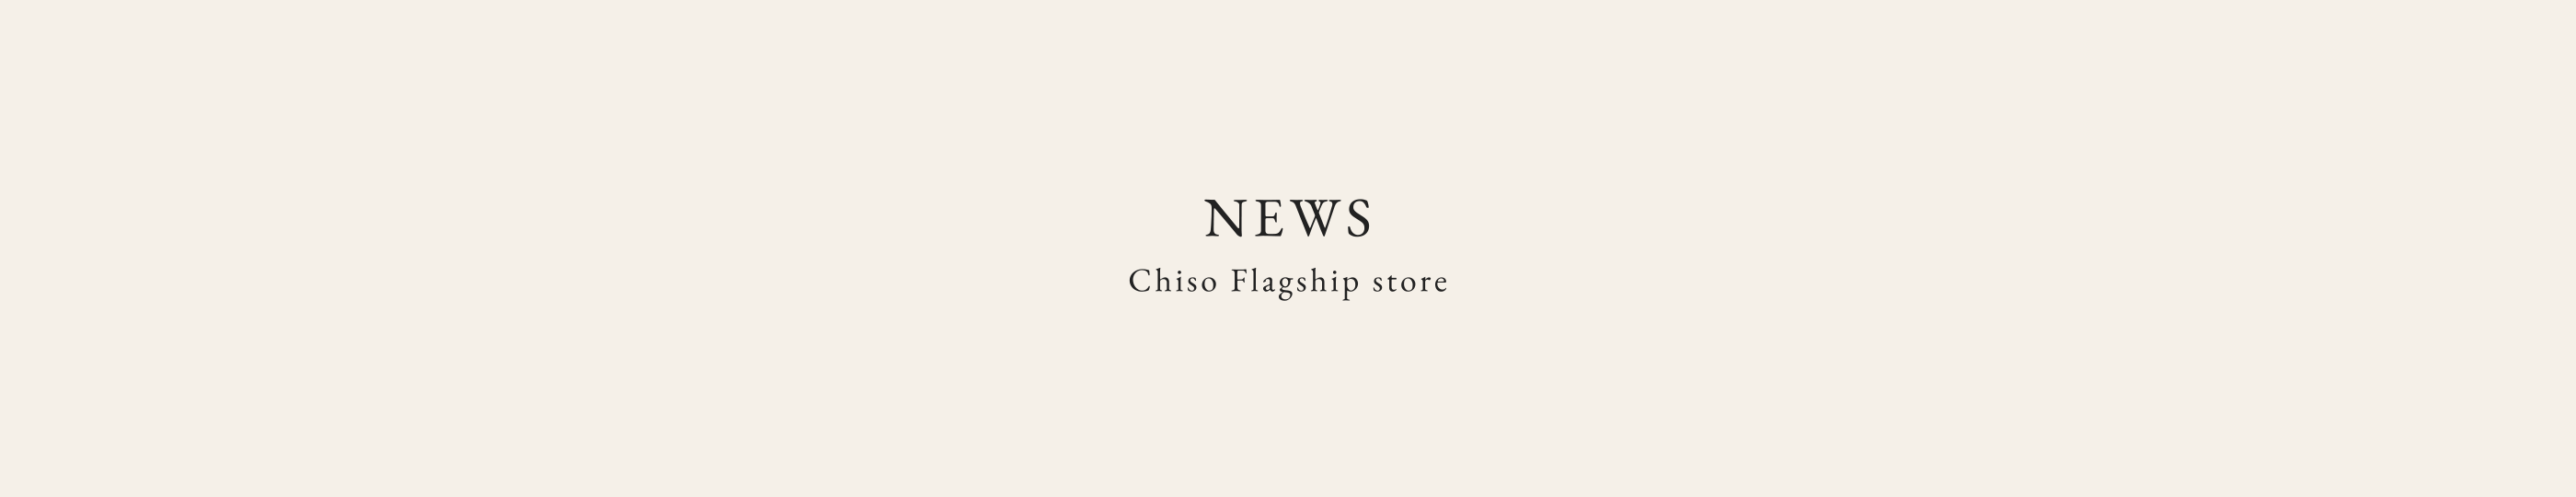 NEWS Chiso Flagship store